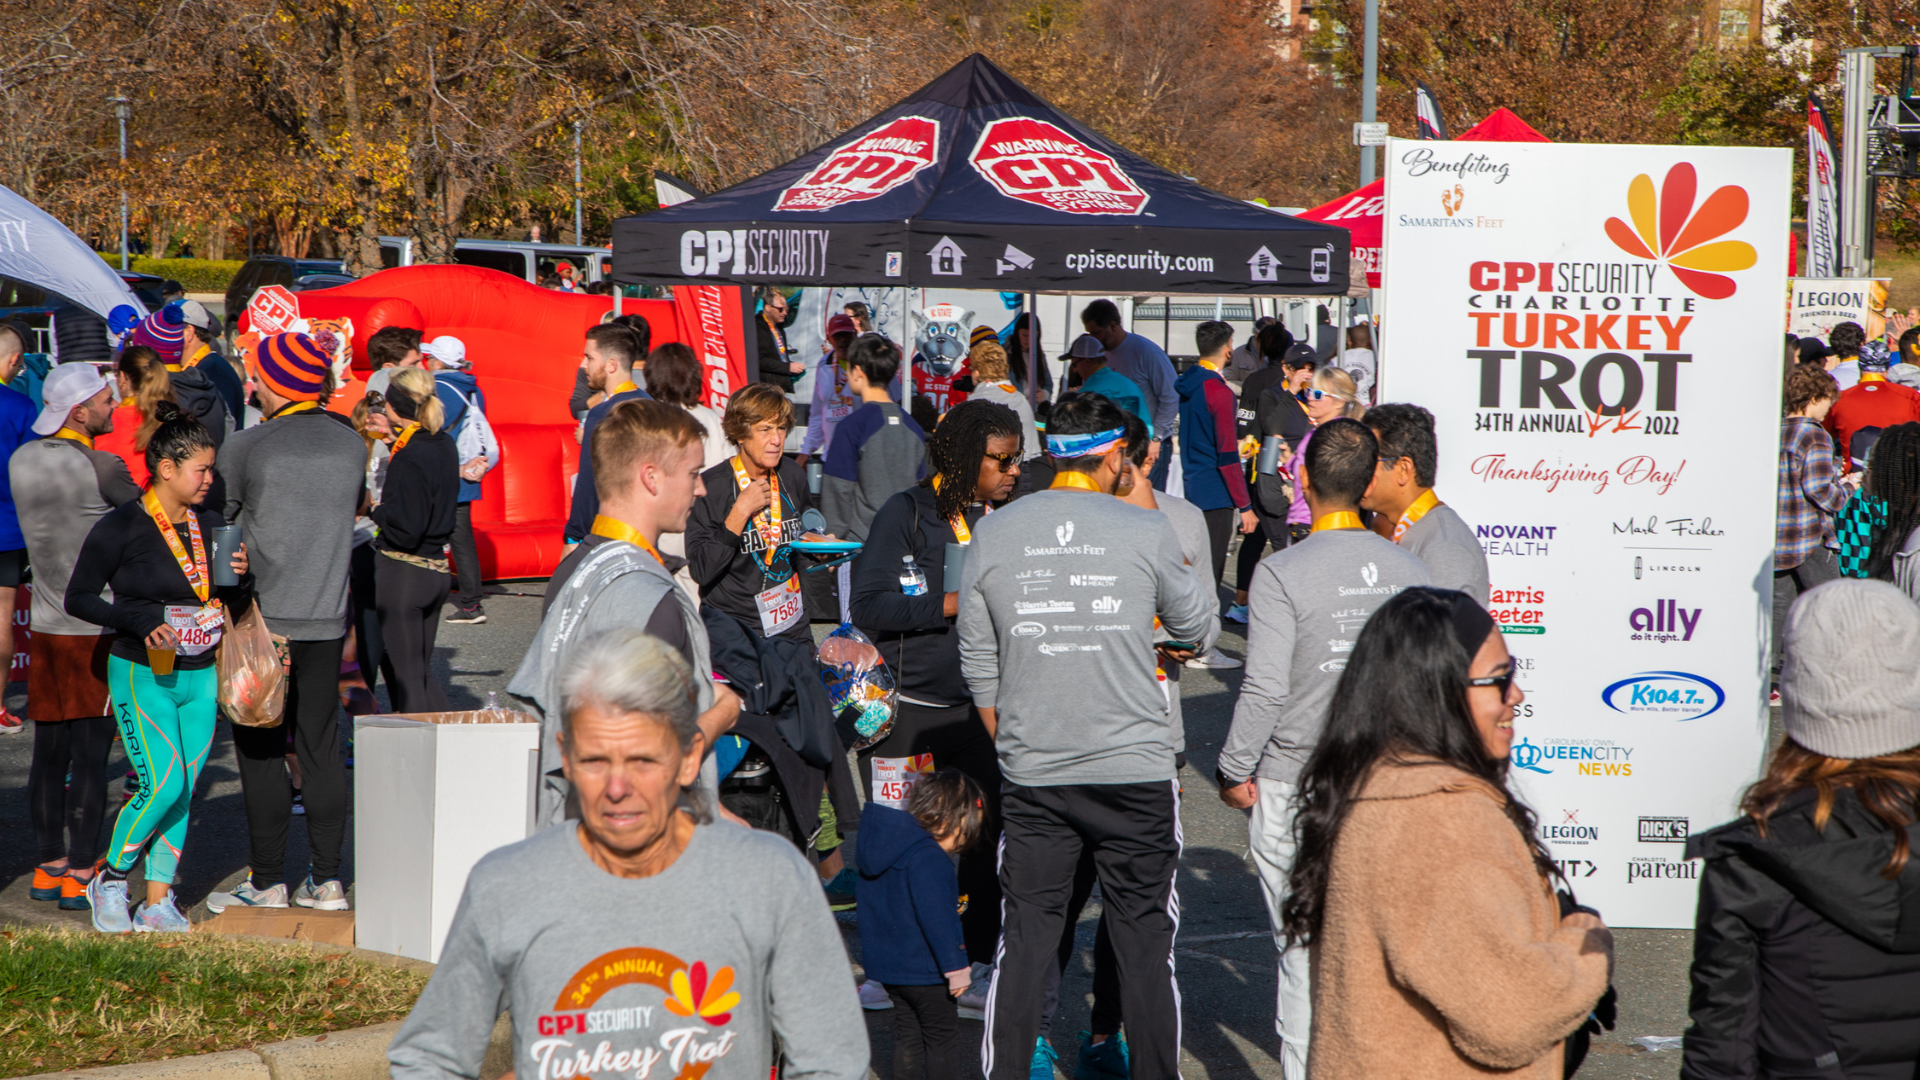 CPI Security Charlotte Turkey Trot Race Day